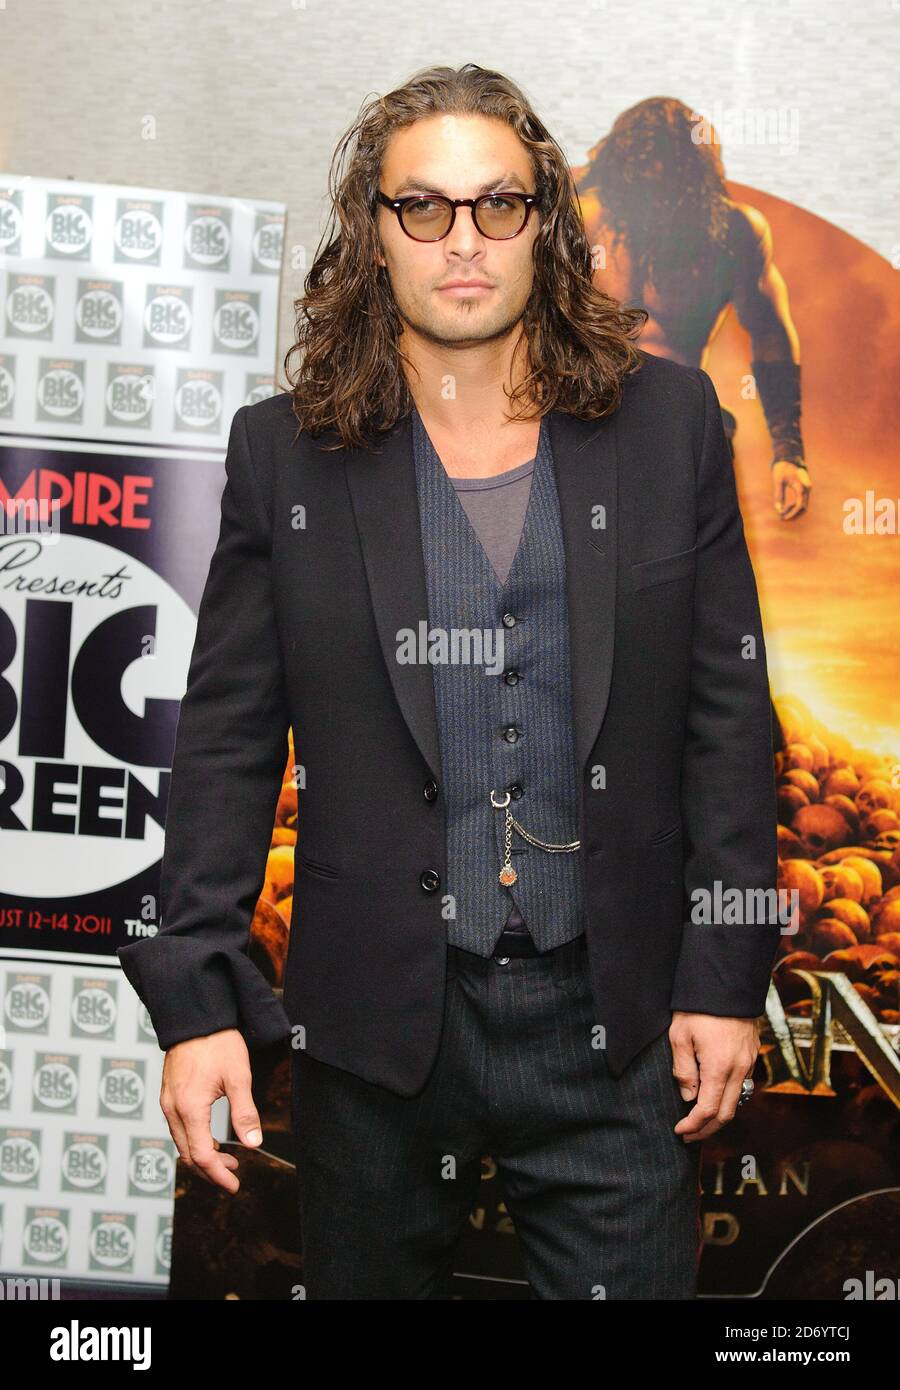 Jason Momoa attends the premiere of Conan The Barbarian, part of the Empire Big Screen at the O2 Cineworld in east London. Stock Photo